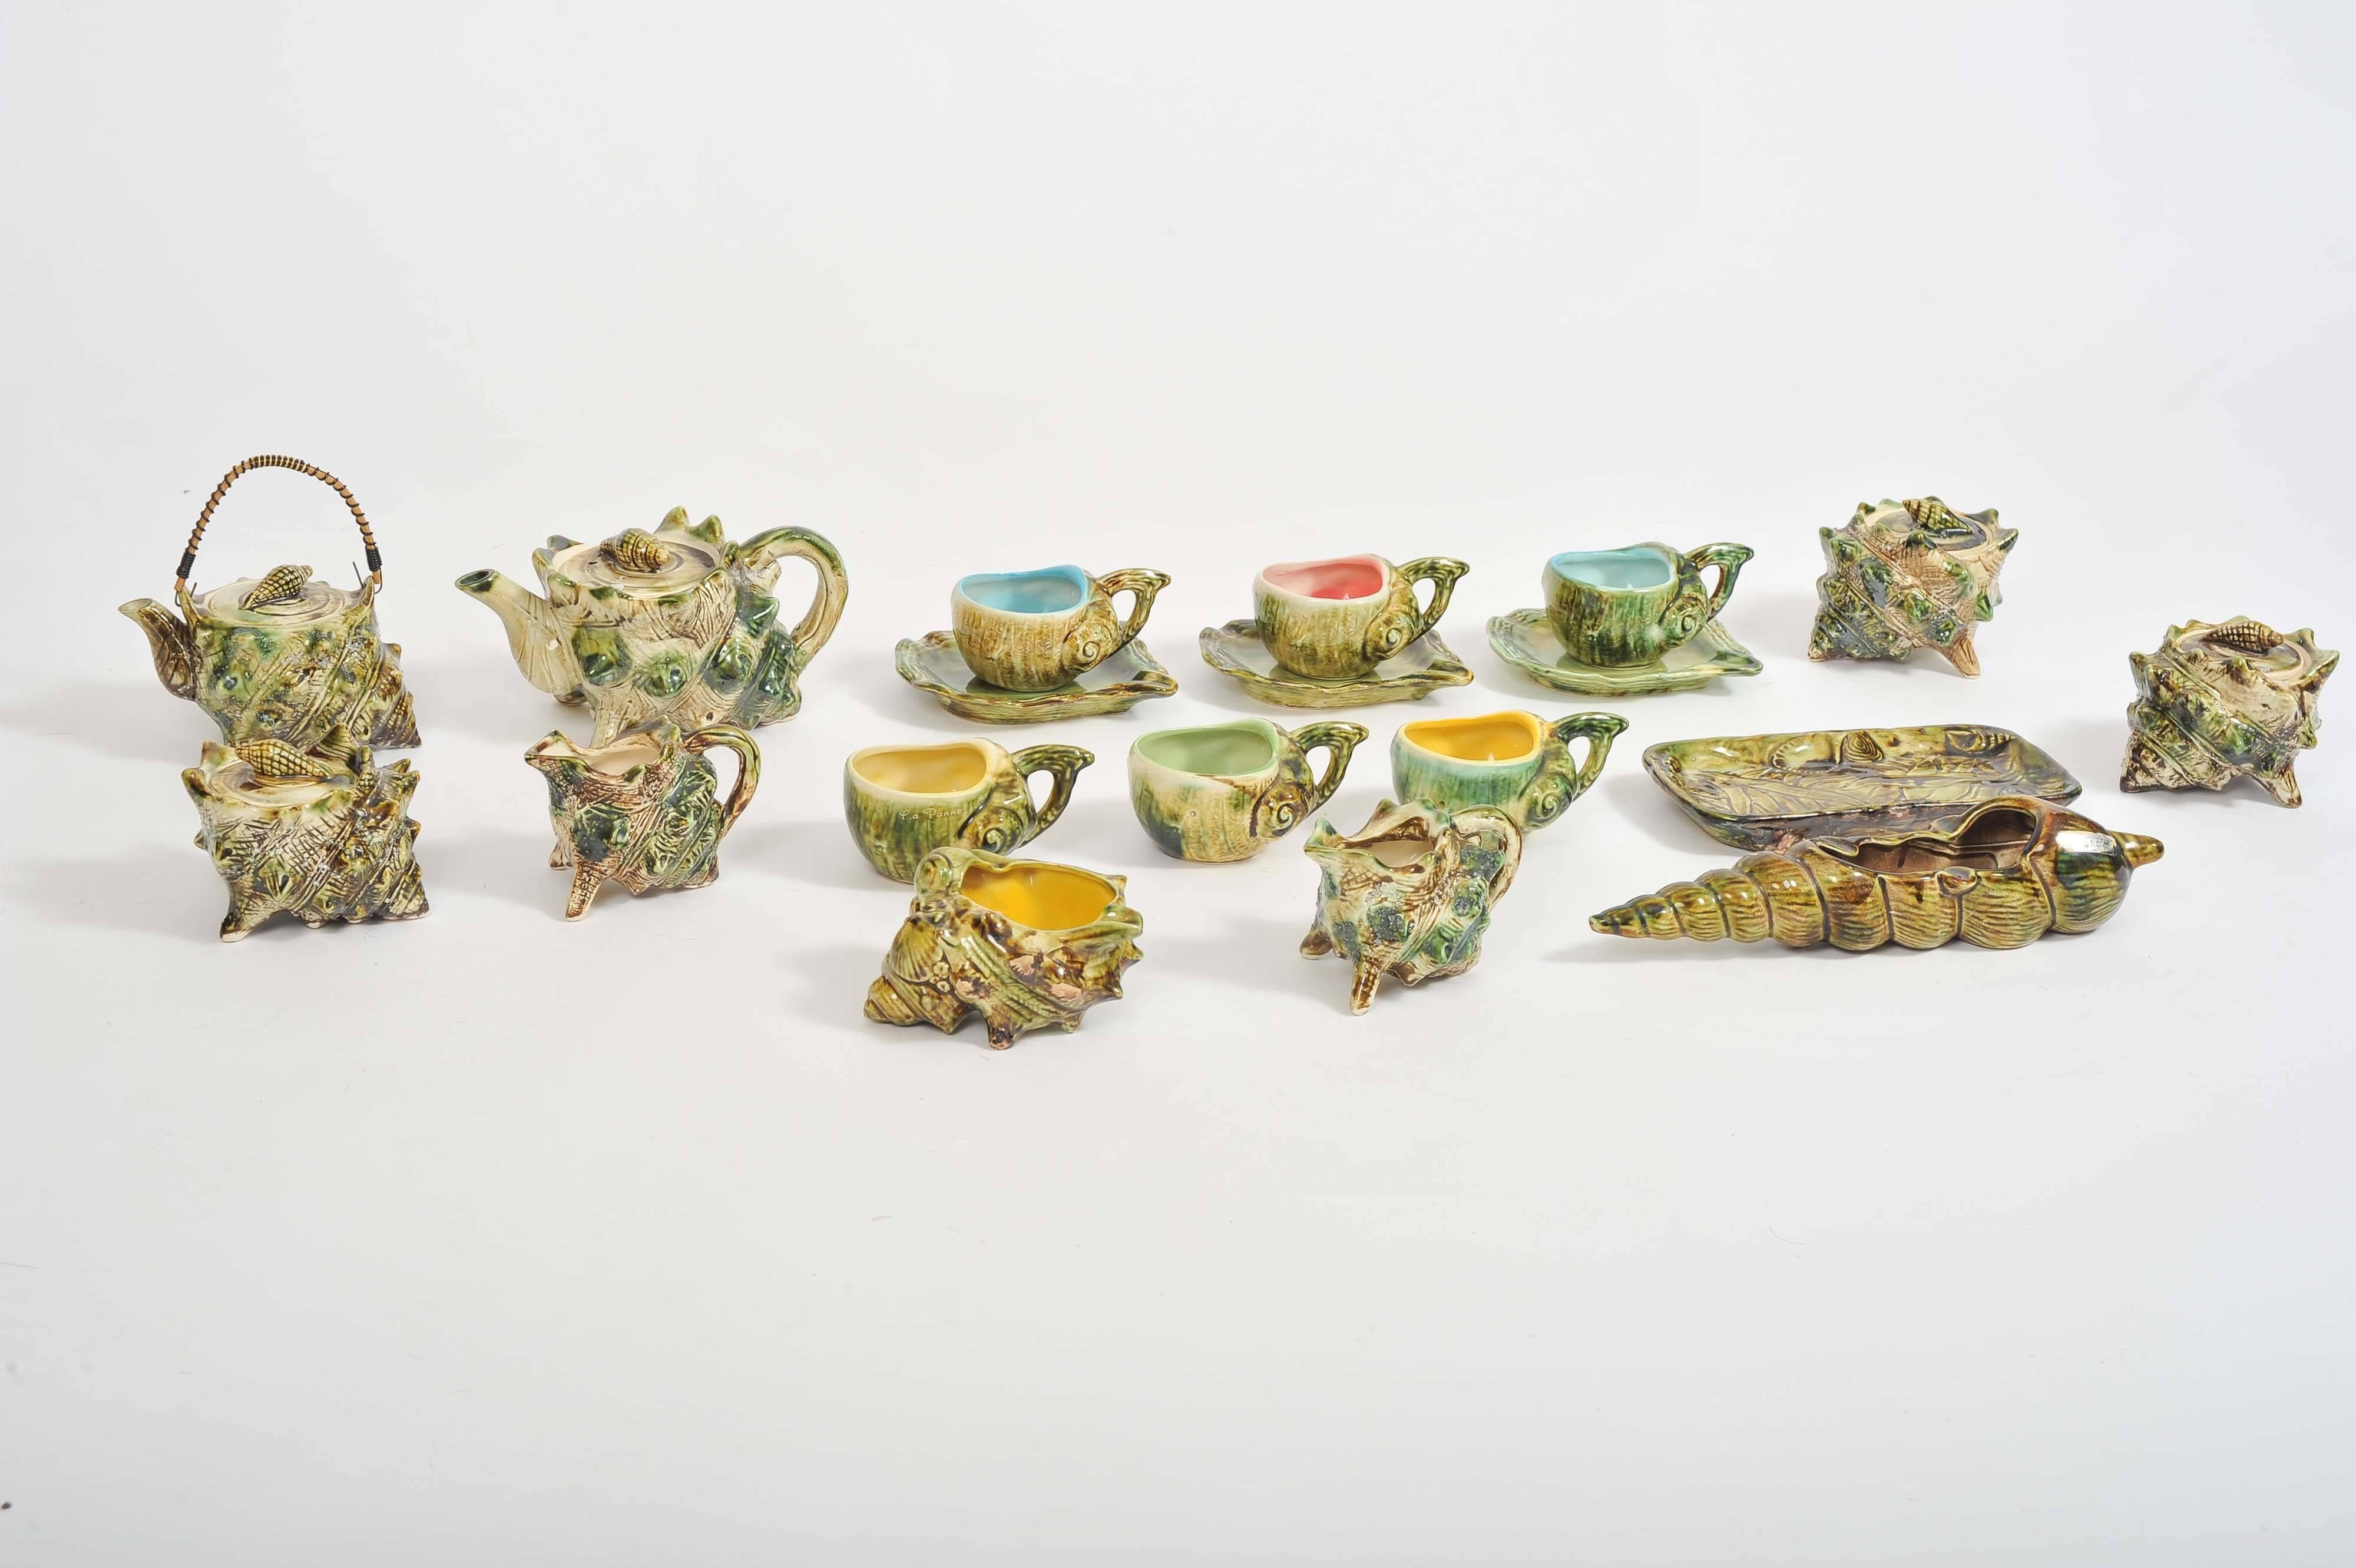 A 1950s vintage kitsch, but cute 'chinoiserie' colourful 15 pieces ceramic tea set from Belgium.

Made by Klemsker/La Panne